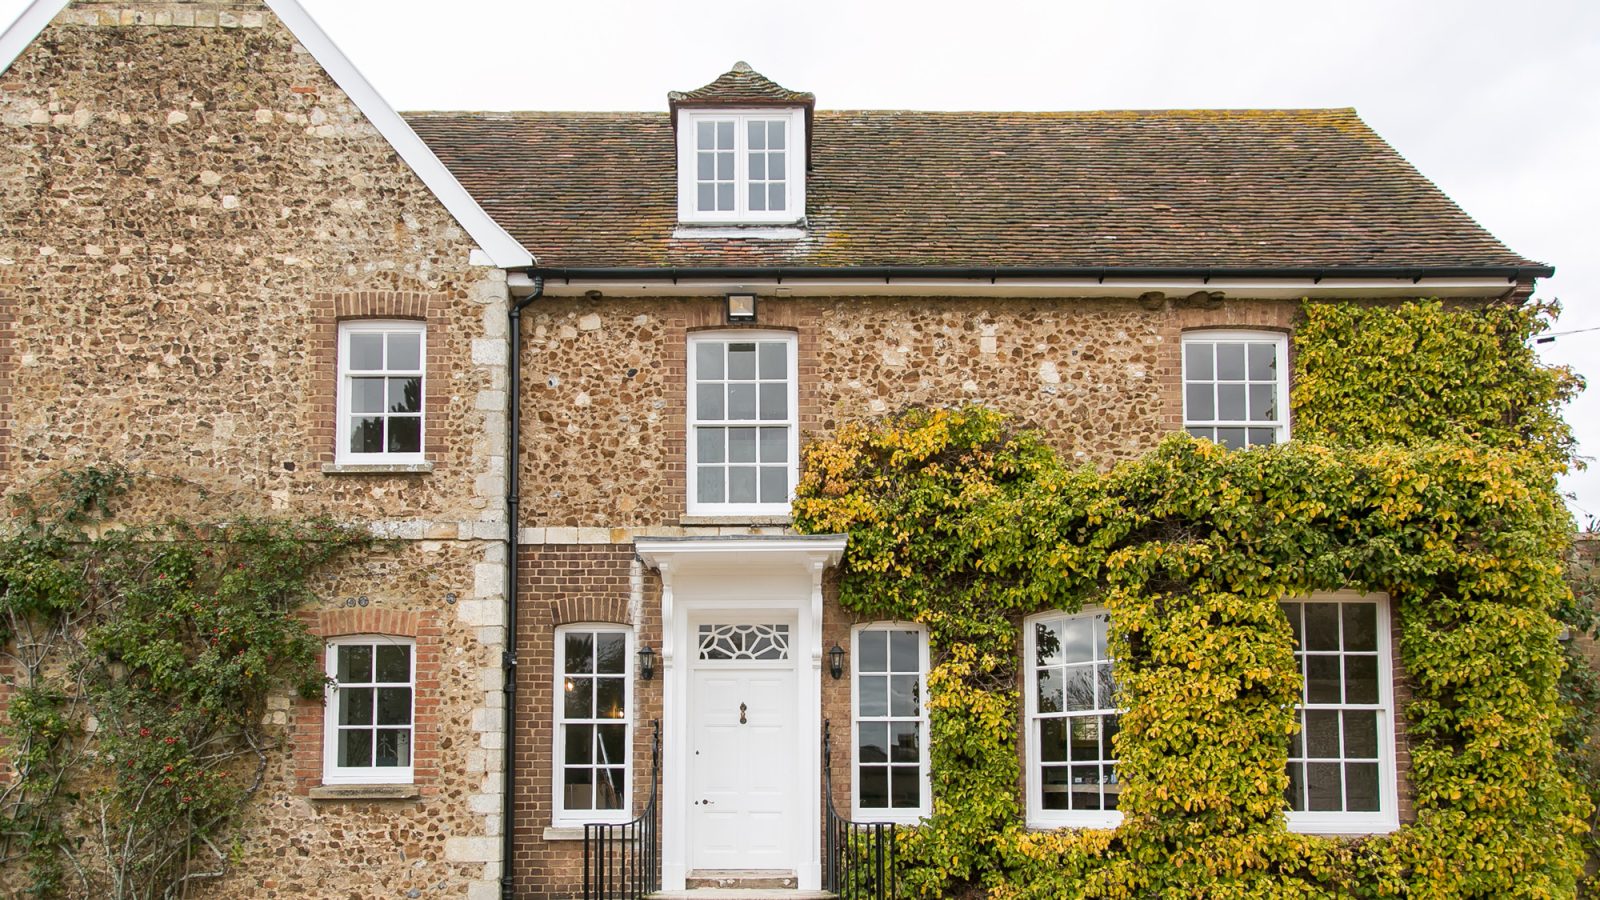 Butley Abbey Farmhouse - kate & tom's Large Holiday Homes